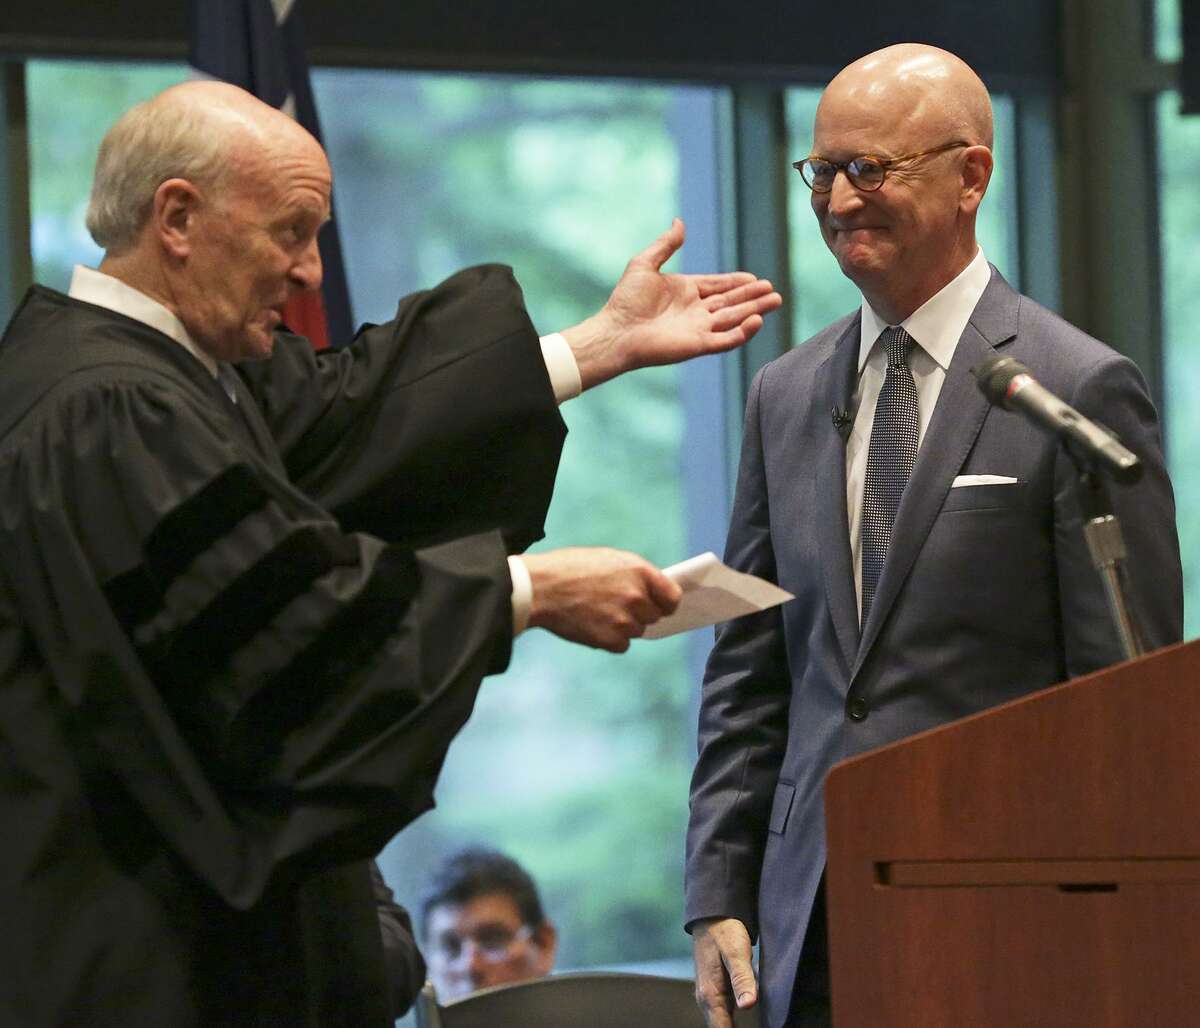 In this 2015 photo, U.S. District Judge Fred Briery (left) presents U.S. District Judge Robert Pitman following a swearing in ceremony. Biery is presiding over a rancorous civil case involving Quicken Loans and HouseCanary. HouseCanary won a record $706 million jury verdict against a Quicken Loan affiliate early this year in Bexar County.